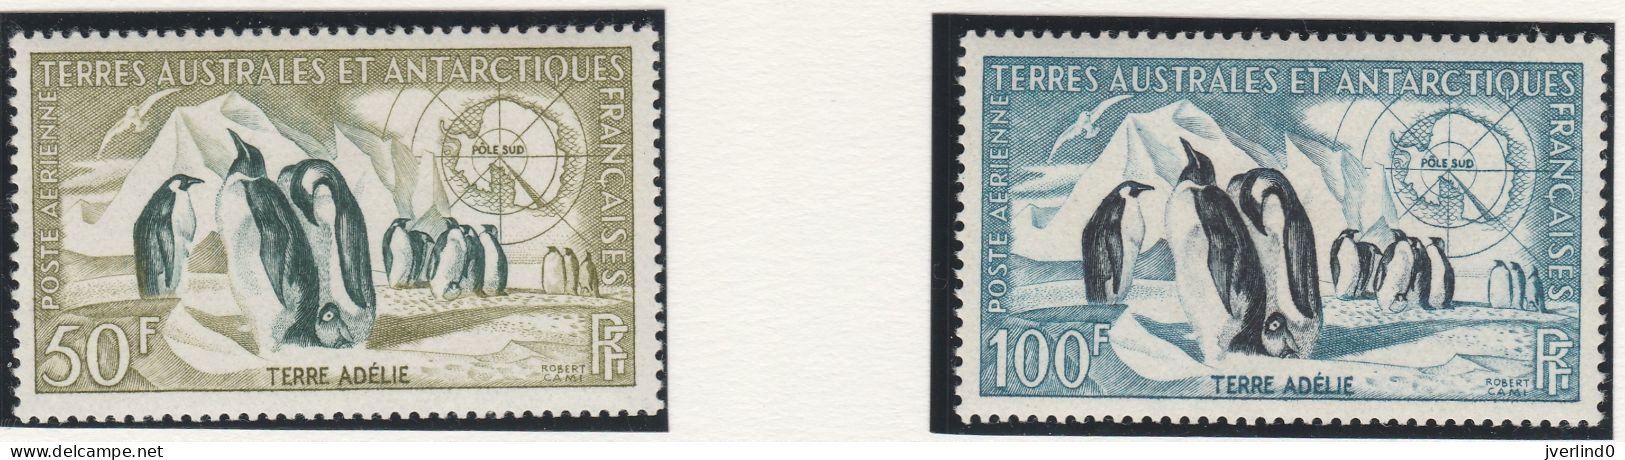 TAAF Poste Aérienne N° 2 + 3 Neufs MNH Manchots - Penguins - Unused Stamps